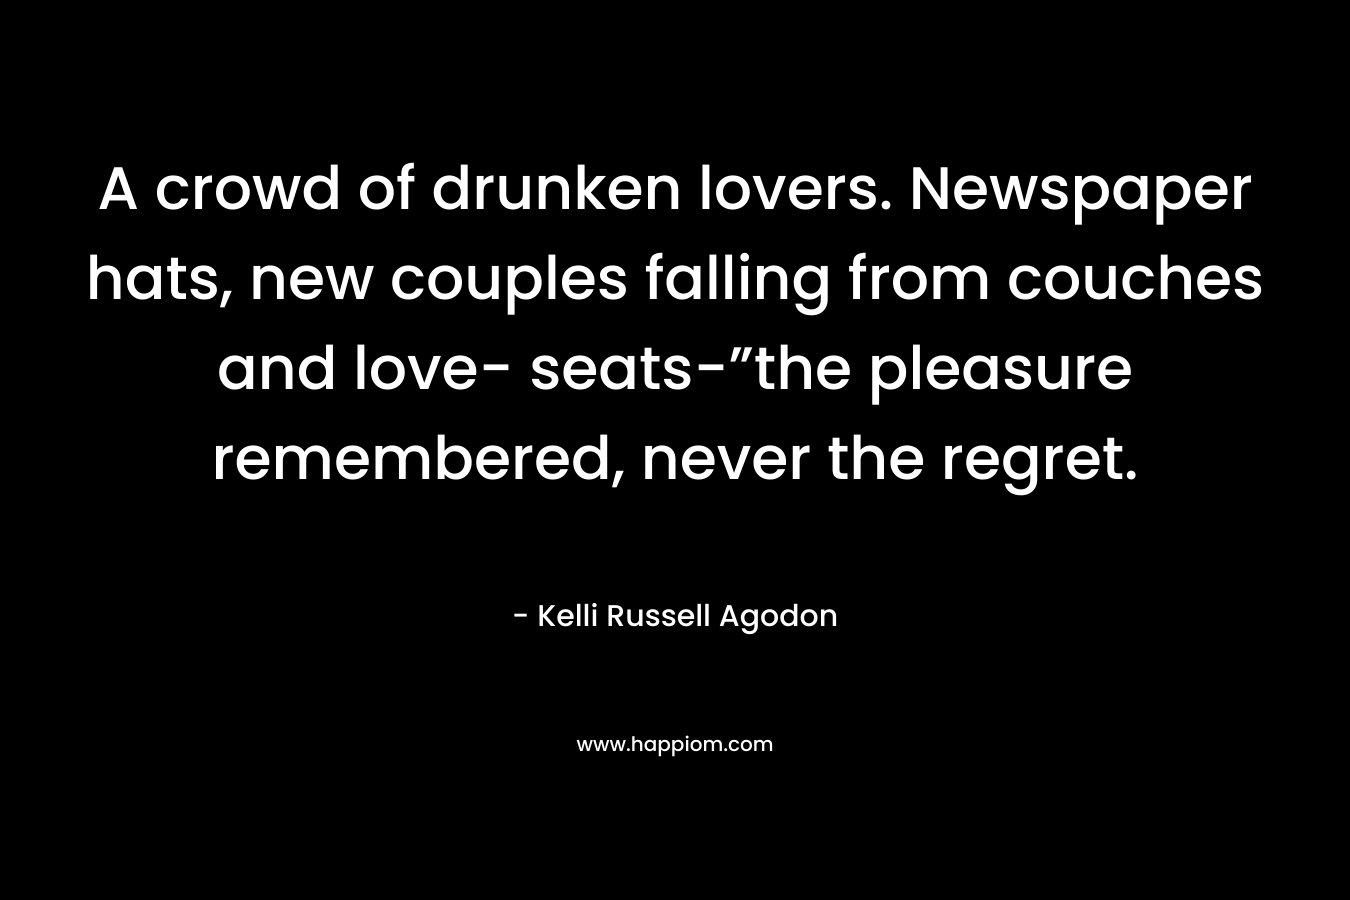 A crowd of drunken lovers. Newspaper hats, new couples falling from couches and love- seats-”the pleasure remembered, never the regret. – Kelli Russell Agodon